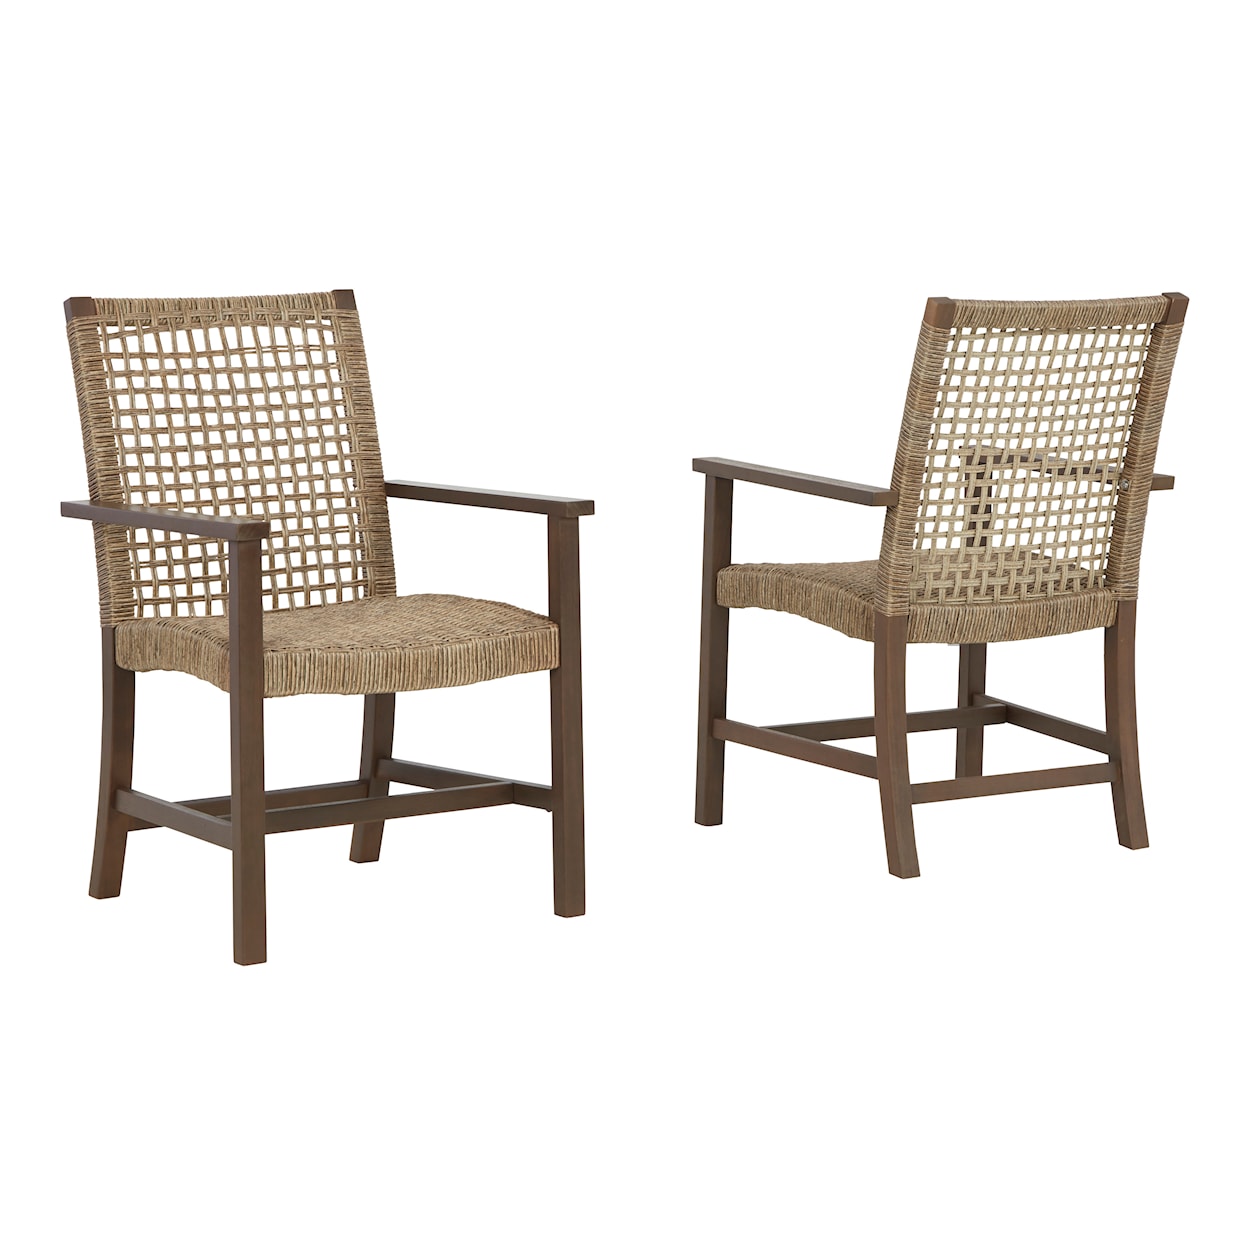 Ashley Signature Design Germalia Outdoor Dining Table and 4 Chairs